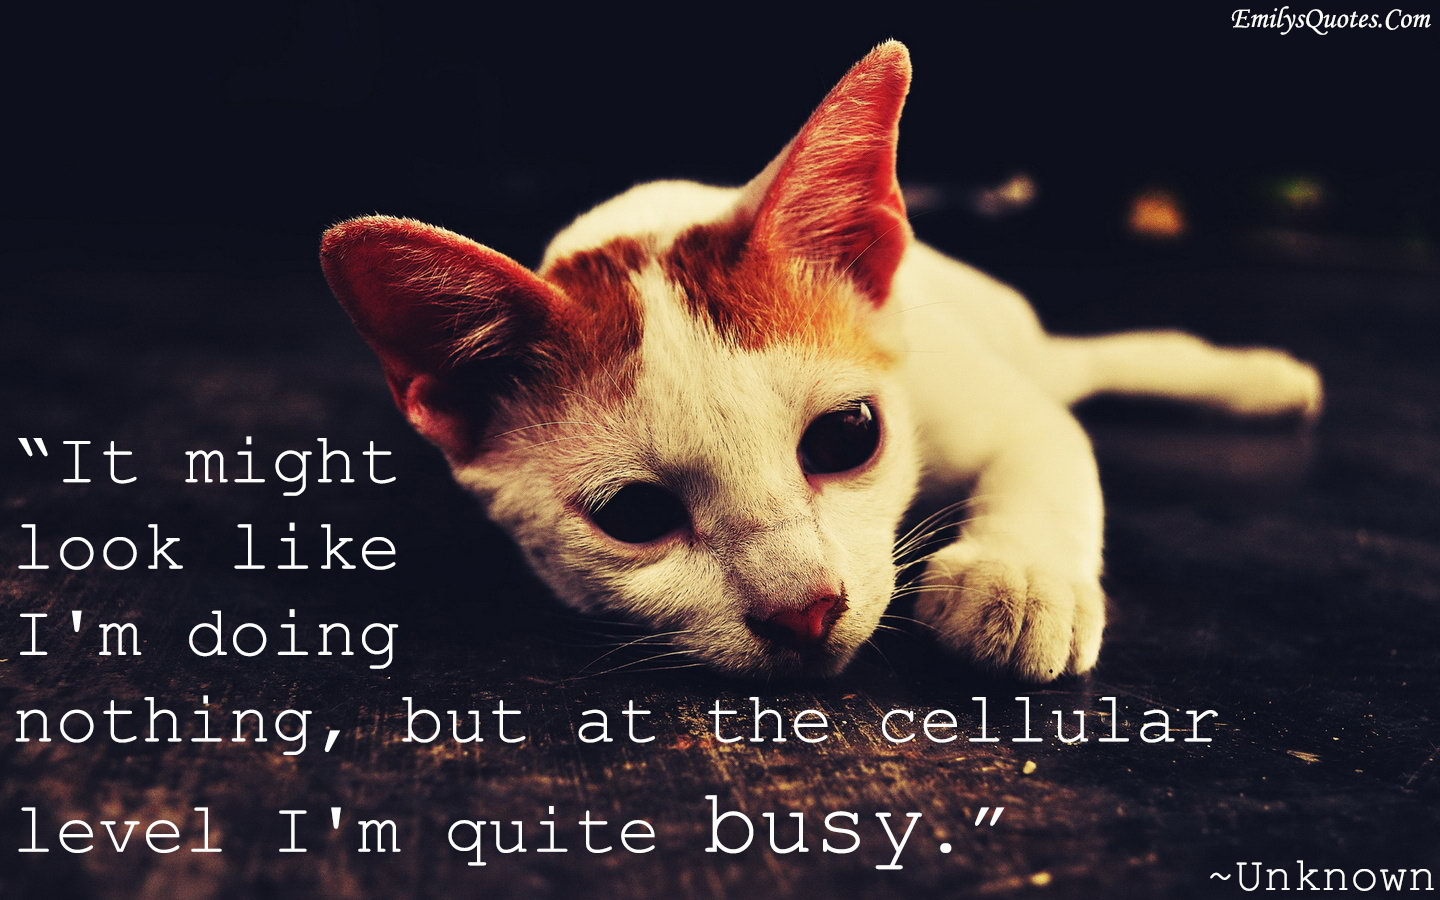 It might look like I'm doing nothing, but at the cellular level I'm quite  busy | Popular inspirational quotes at EmilysQuotes